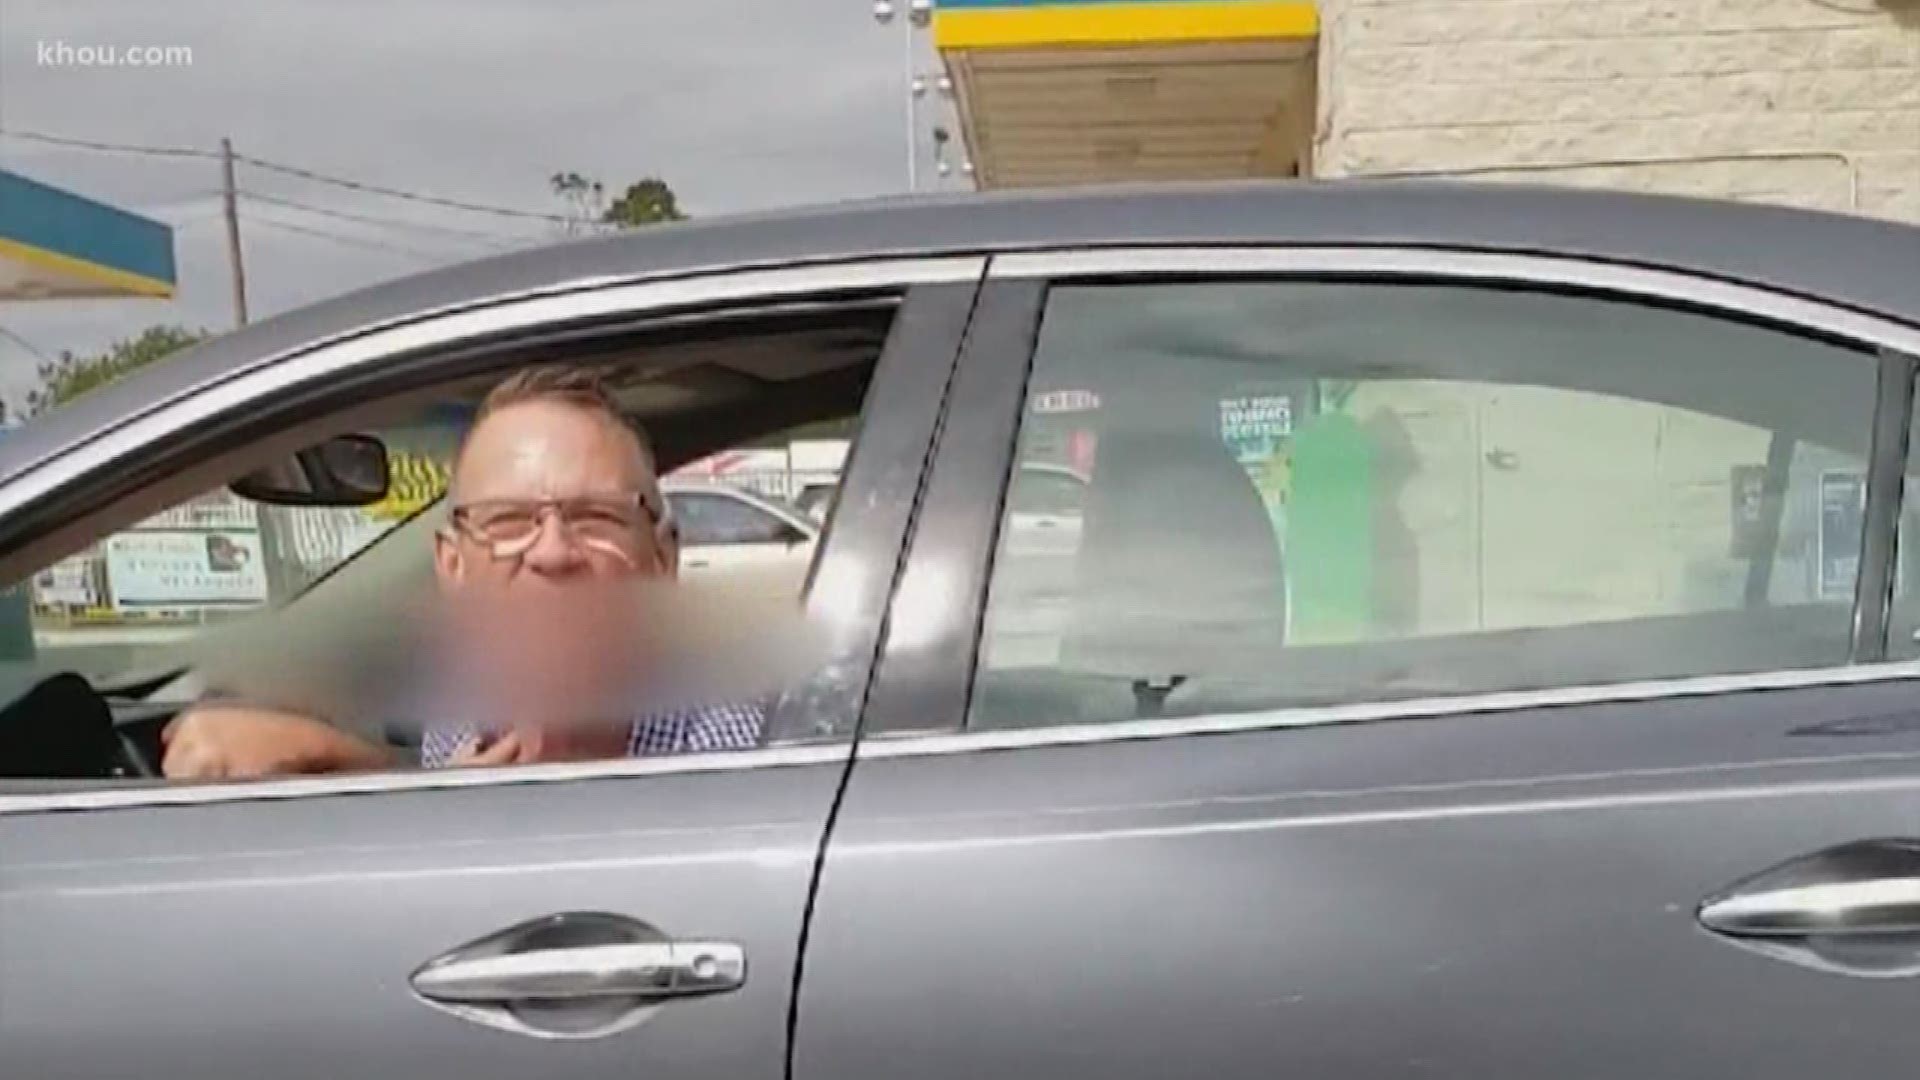 A driver's road rage rant turns racist against a mother and the woman had her young daughter in the backseat.